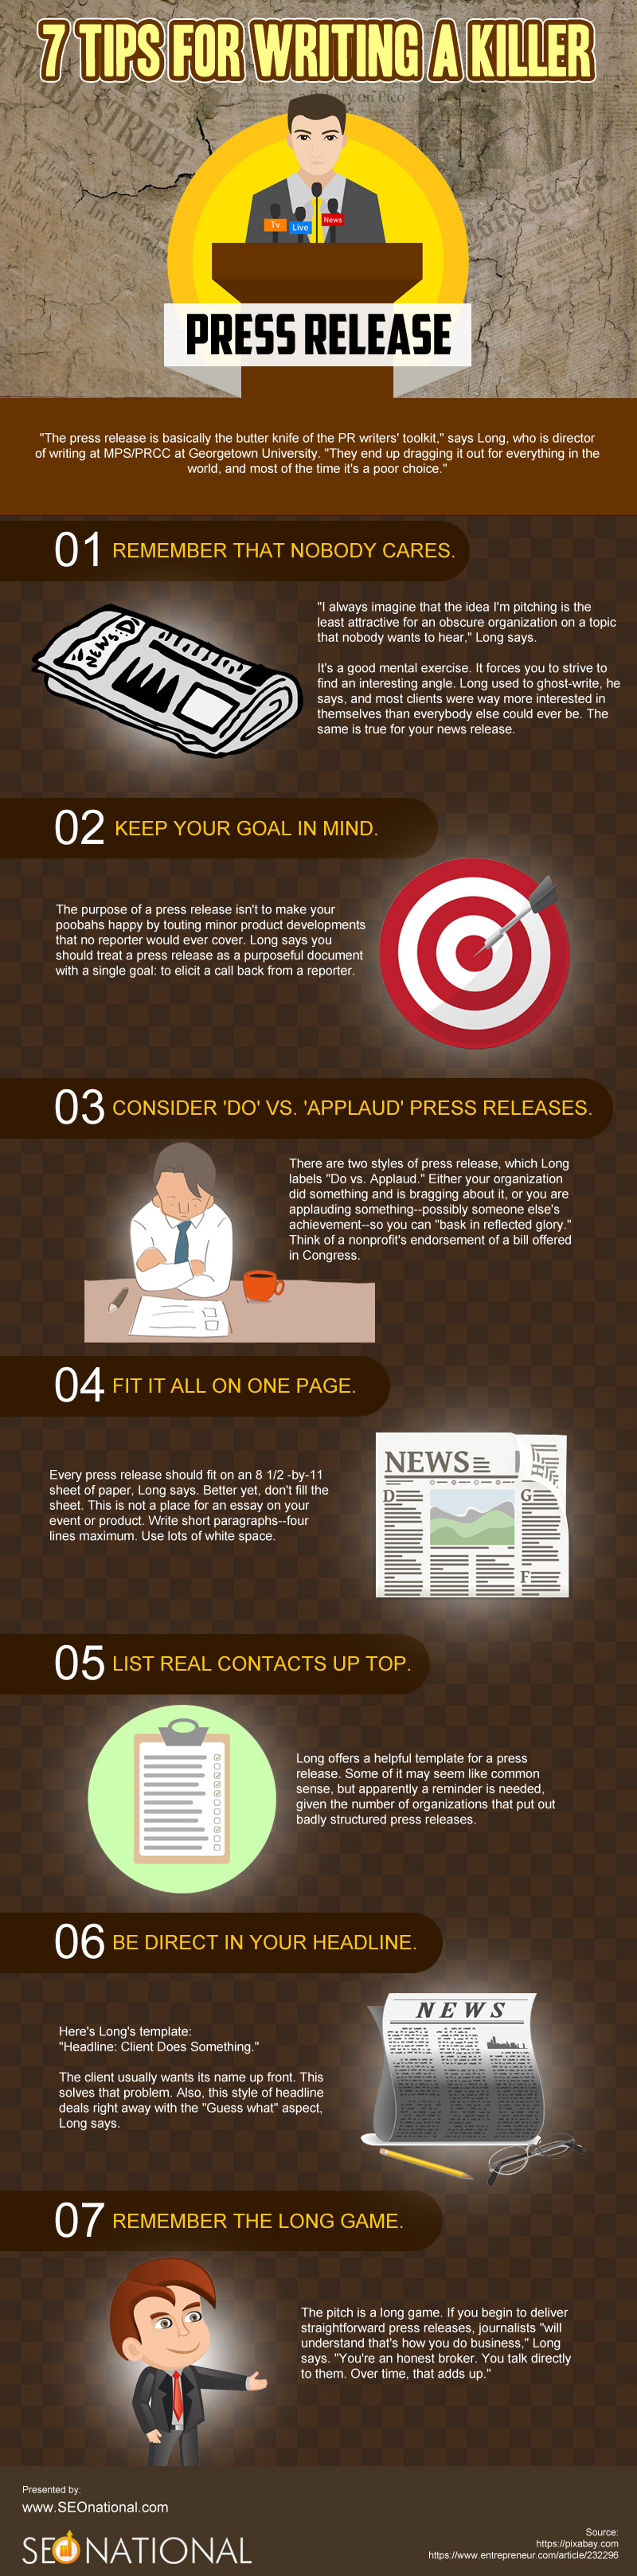 7 Tips for Writing a Killer Press Release